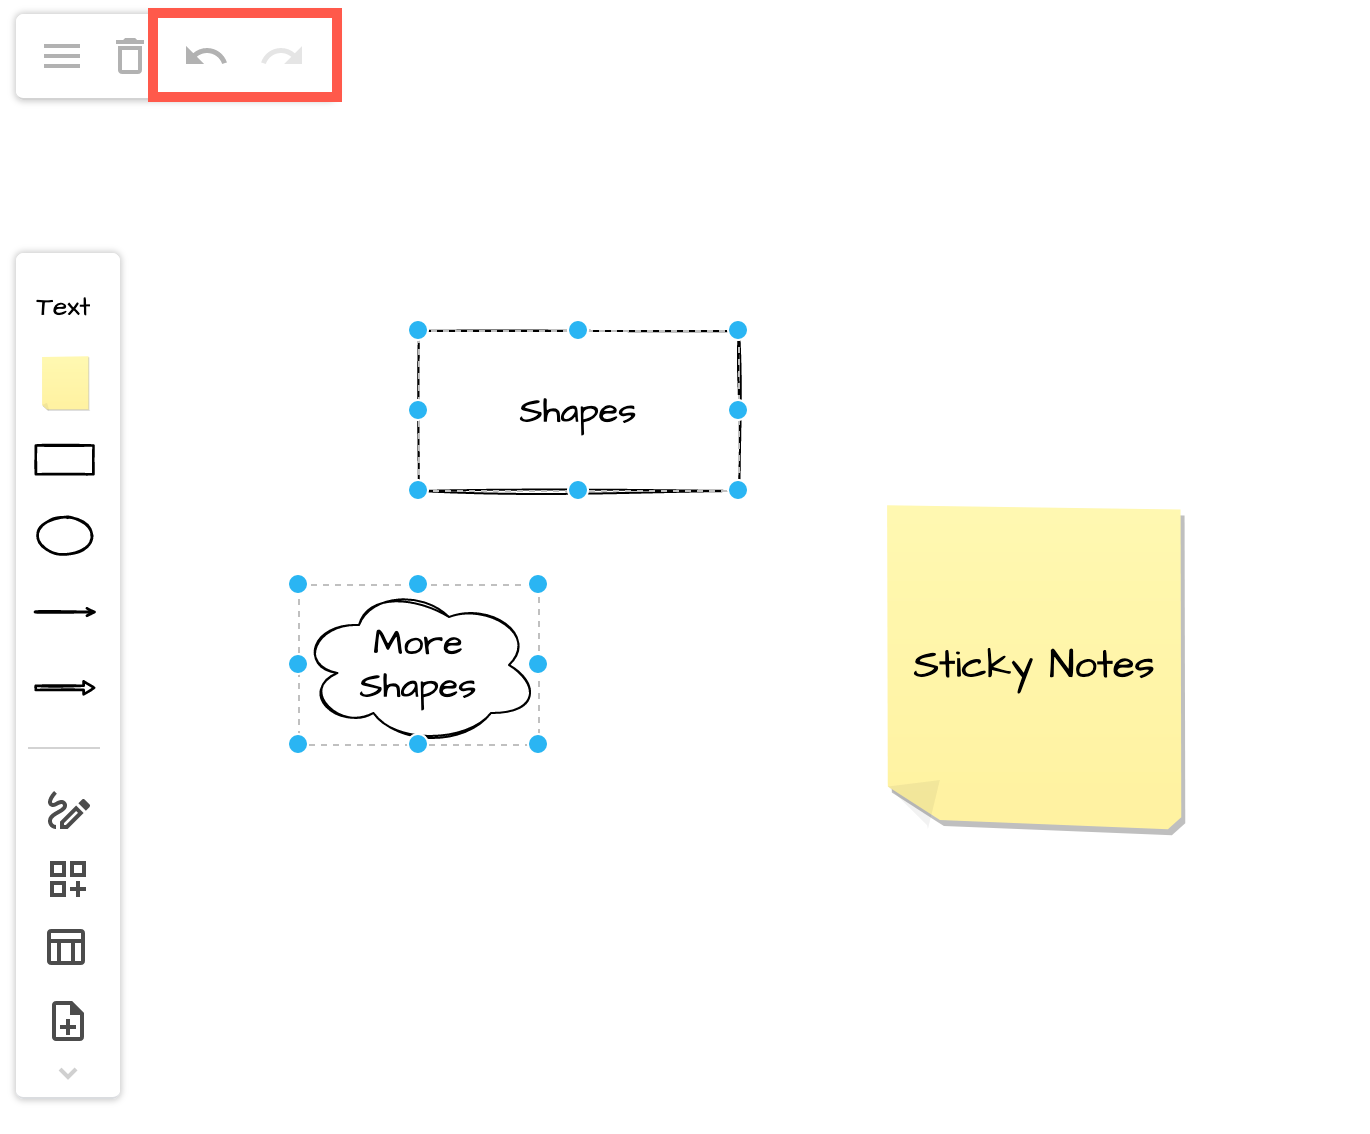 Undo and redo changes easily with the tools in the top right of the draw.io Sketch online whiteboard